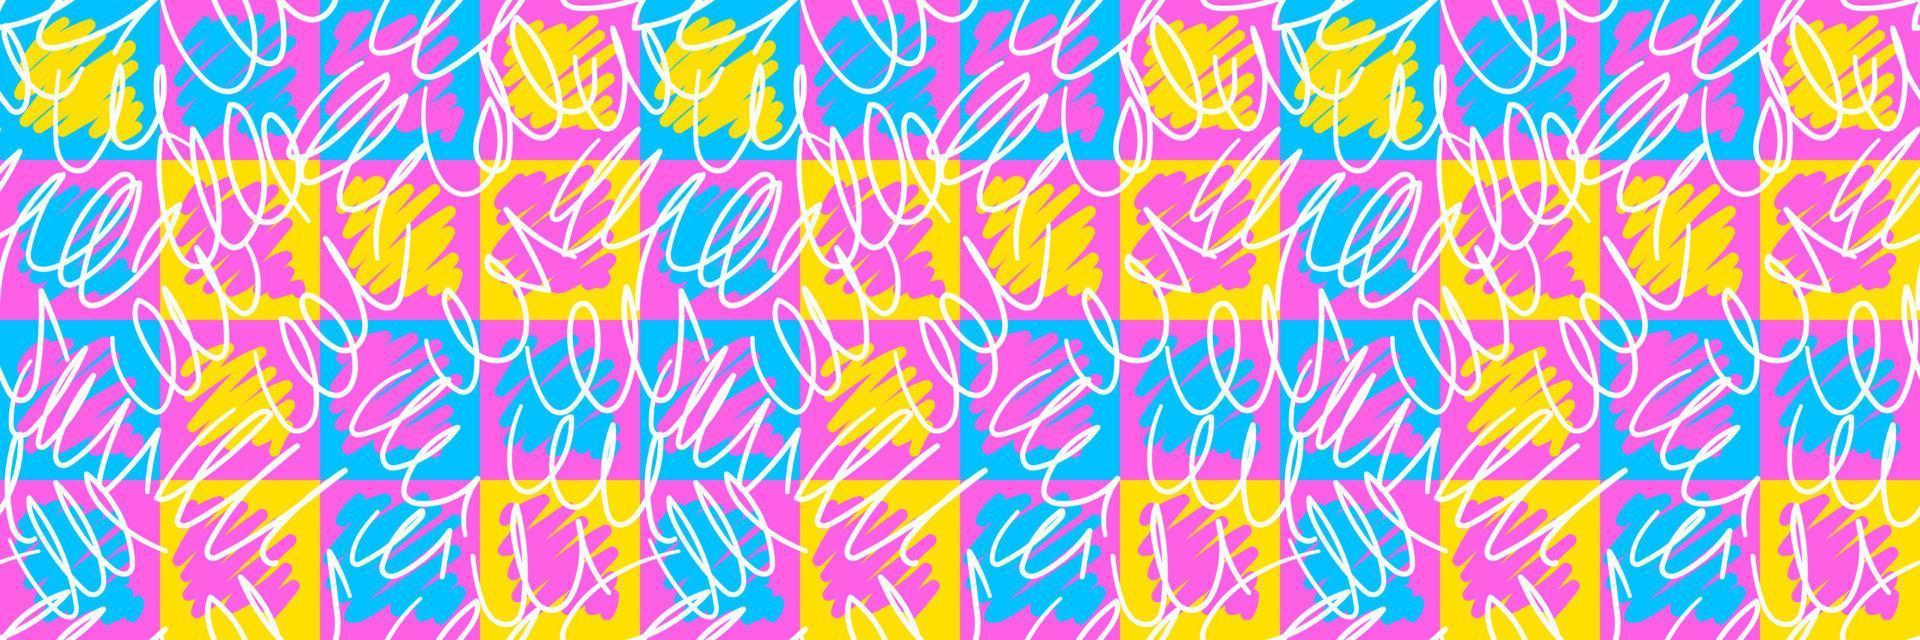 Abstract colorful graffiti seamless pattern with neon squares and scribbles. Bright graphic urban design for textiles, sportswear, prints, wrapping, cover design. Vector illustration.